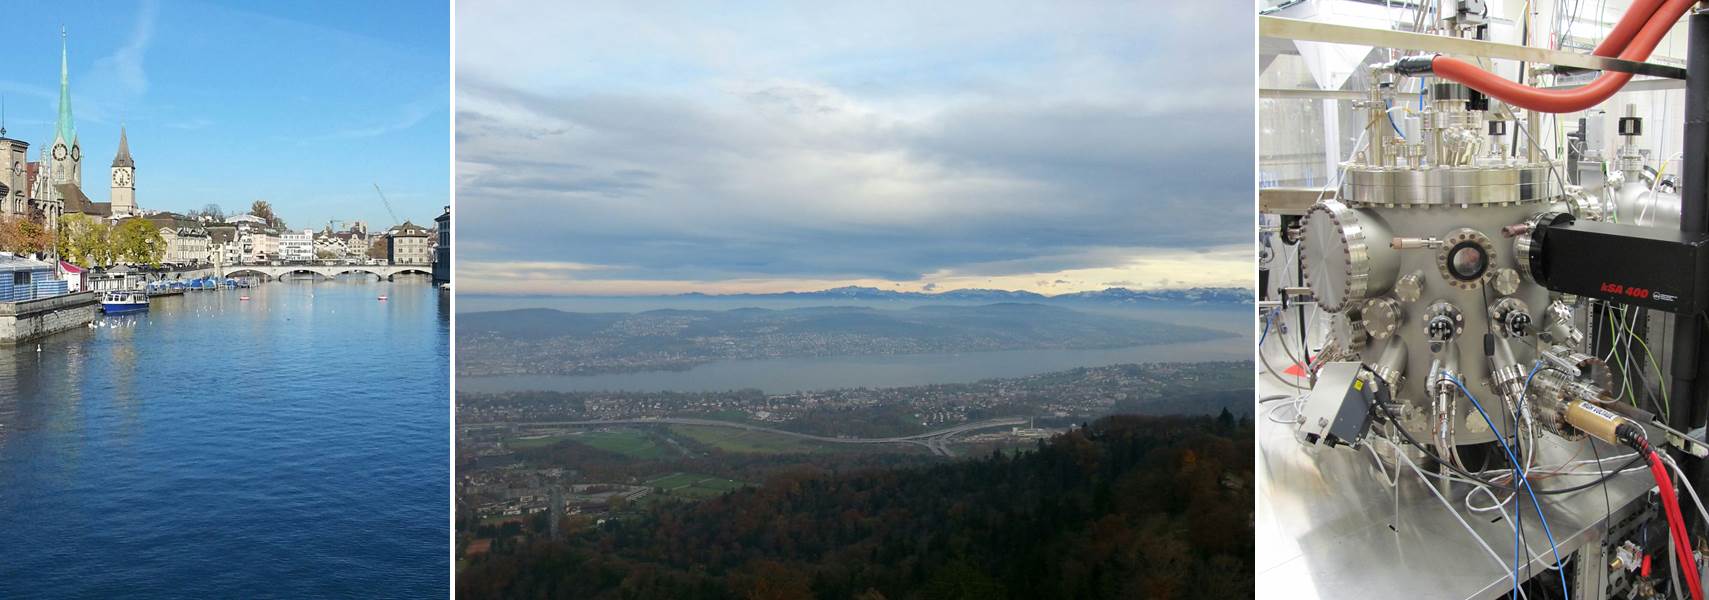 Left: Image of the Limmat in Z&uumlrich, looking downstream from Quaibr&uumlcke at Lake Zurich (facing North). Center: Image of the Swiss Alps from the top of the &Uumletliberg (facing South). Right: Image of molecular beam epitaxy growth machine used in Texas for single crystal thin oxide film deposition.